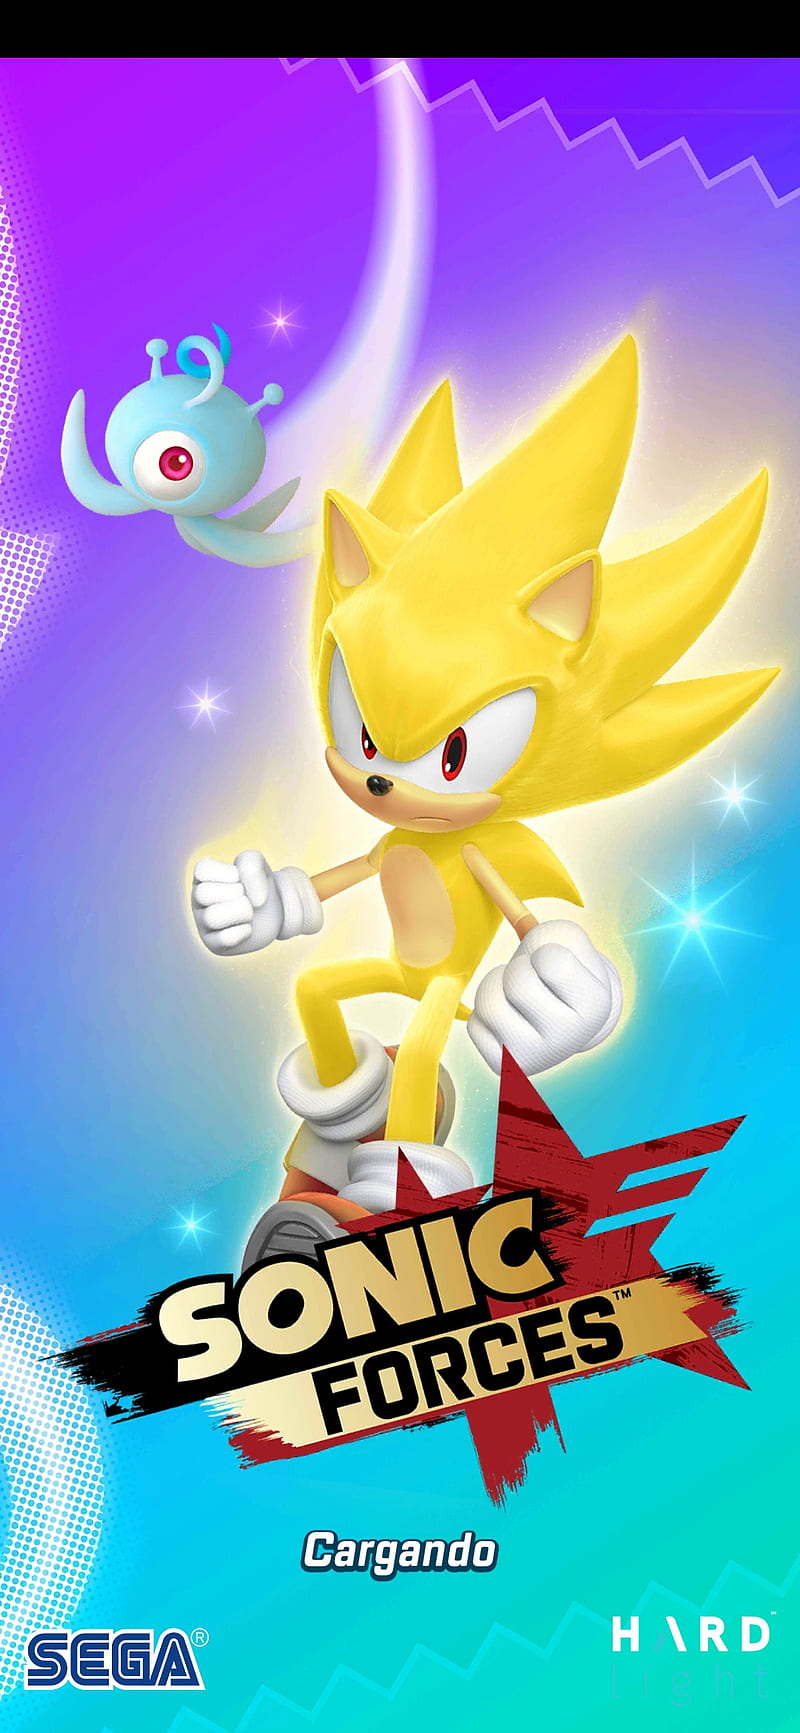 Sonic forces, animated cartoon, fictional character, HD phone wallpaper